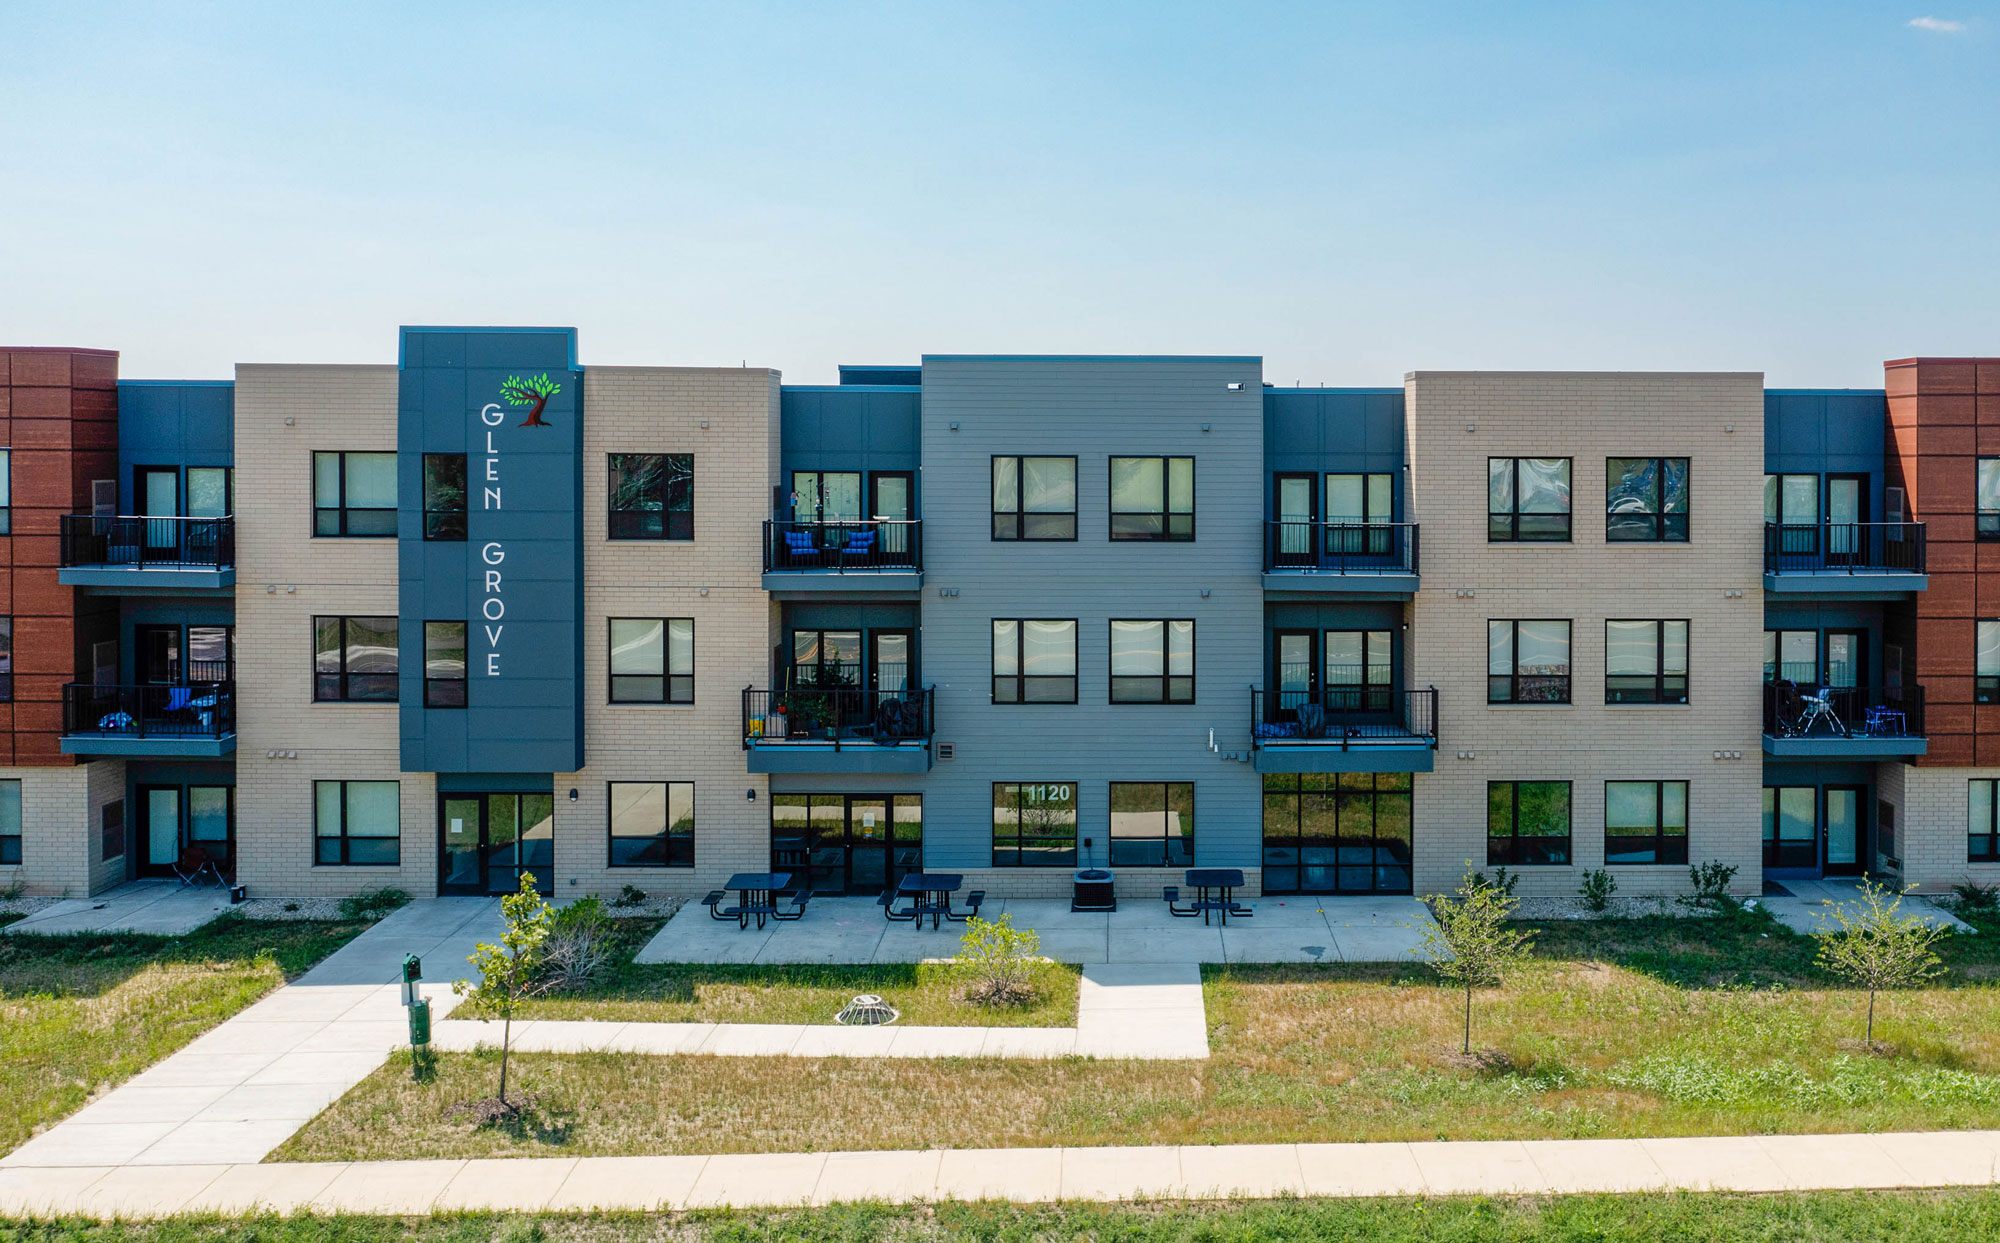 Glen Grove Apartments in Cottage Grove, WI | Architecture by JLA Architects